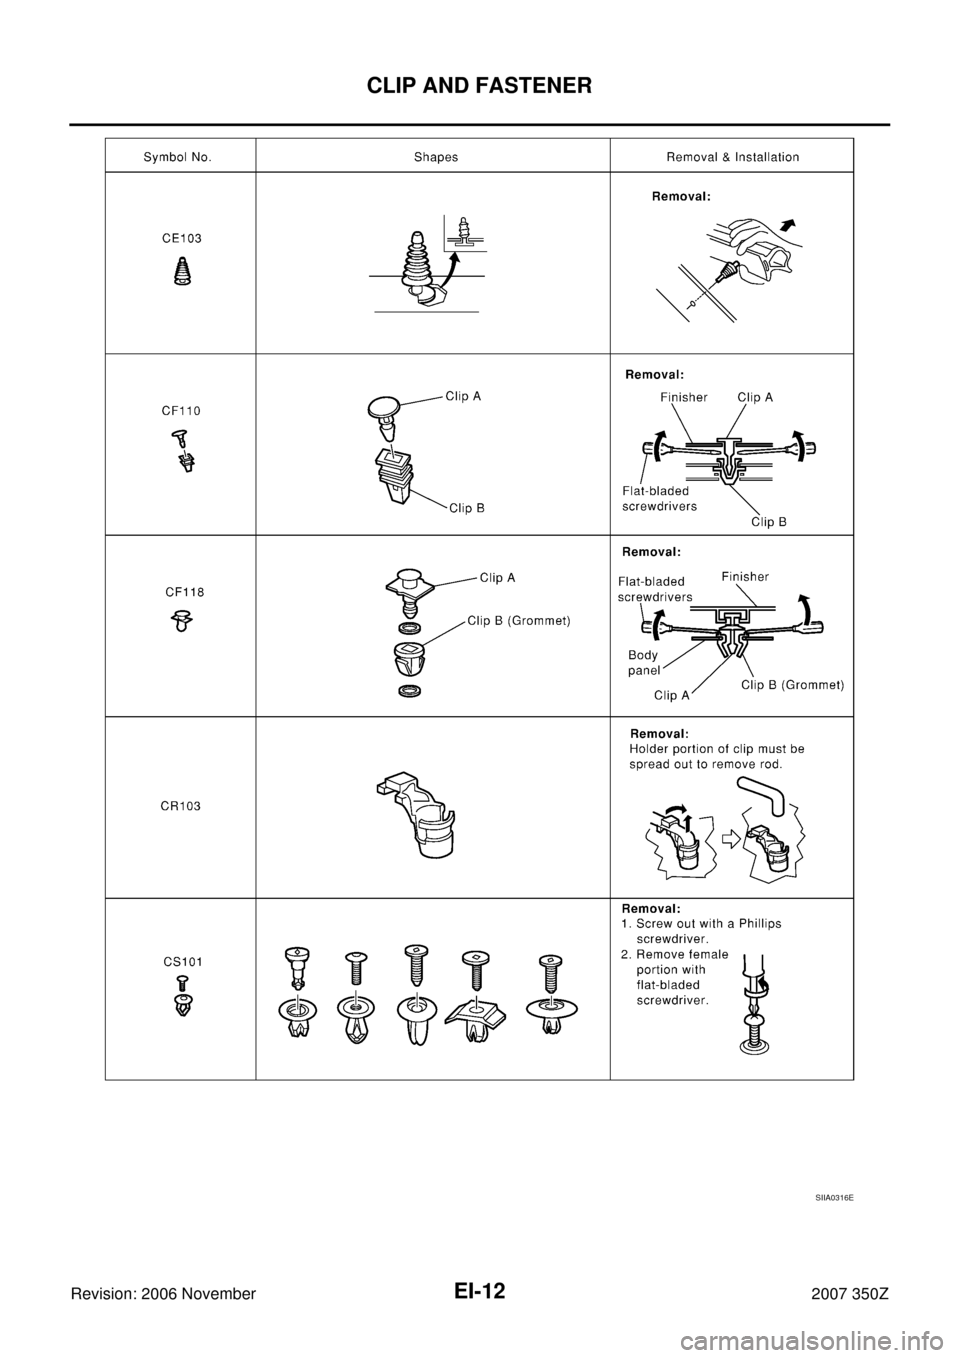 NISSAN 350Z 2007 Z33 Exterior And Interior User Guide EI-12
CLIP AND FASTENER
Revision: 2006 November2007 350Z
SIIA0316E 